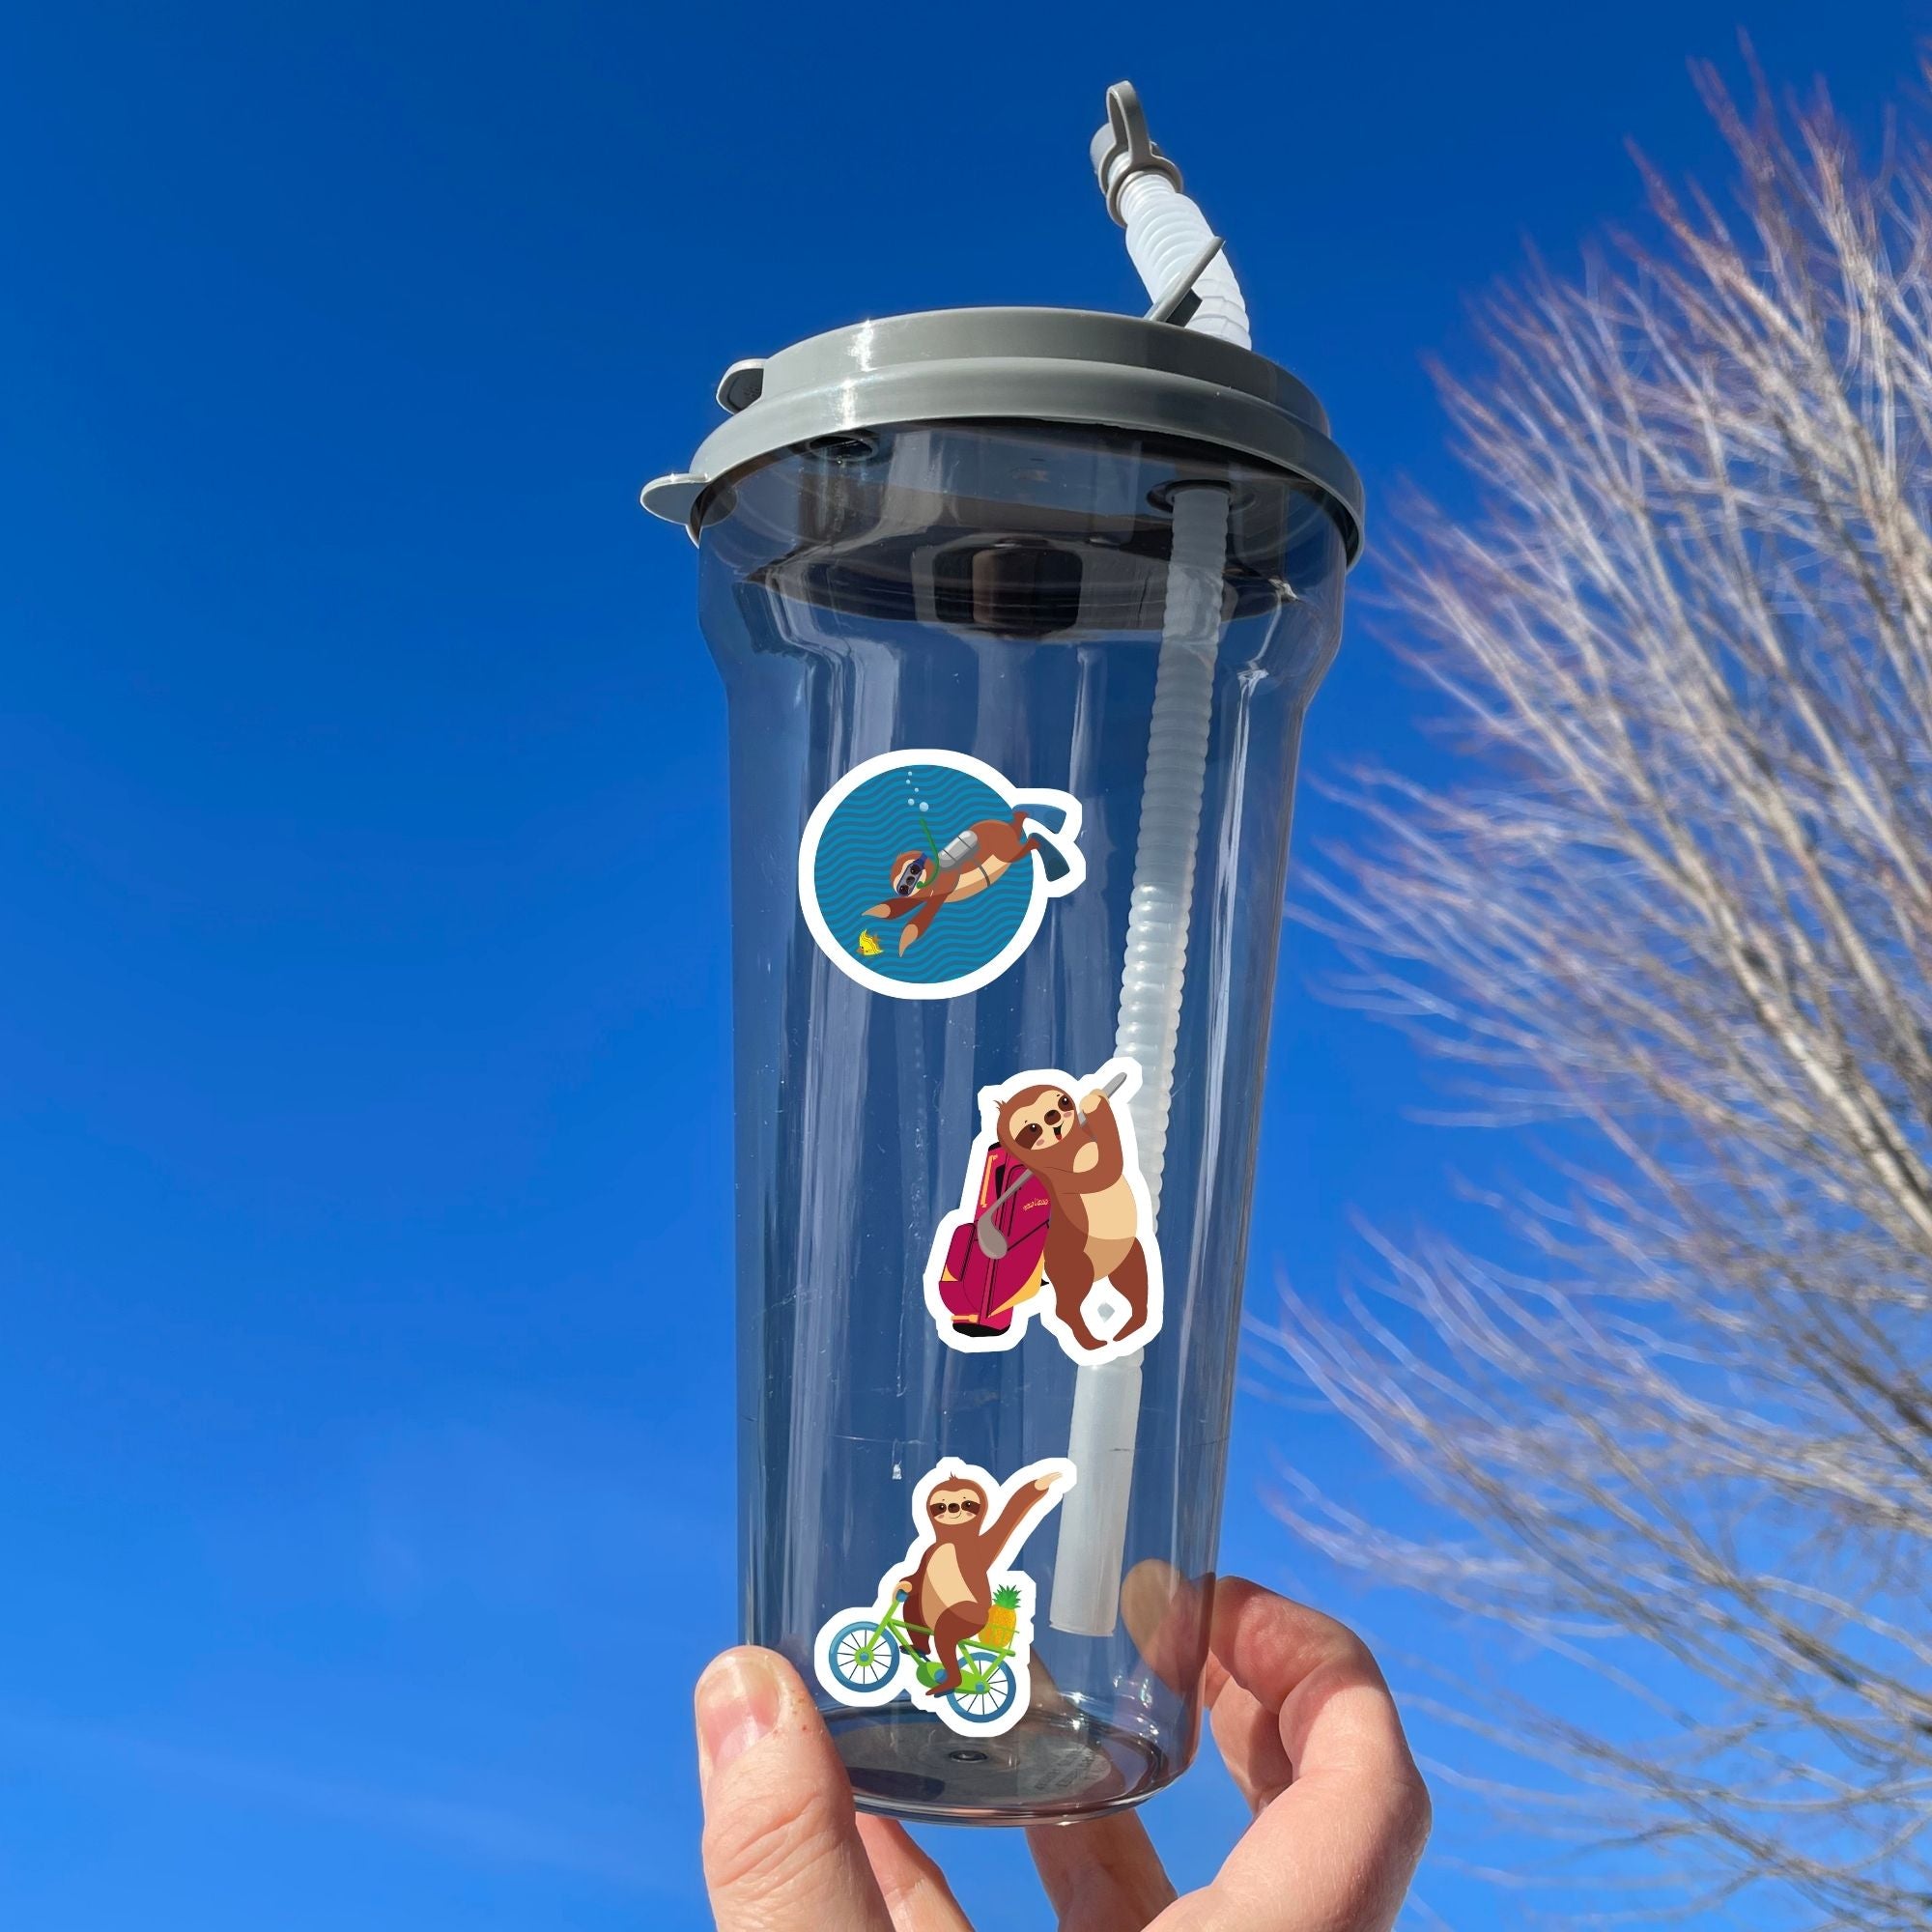 Sloth's on Bikes. Sloth's scuba diving. Sloth's relaxing. This sticker sheet is full of sticker images of sloth's doing all kinds of fun things! This image is of a water bottle with stickers of a sloth scuba diving, a sloth playing golf, and a sloth on a bicycle, applied to it.